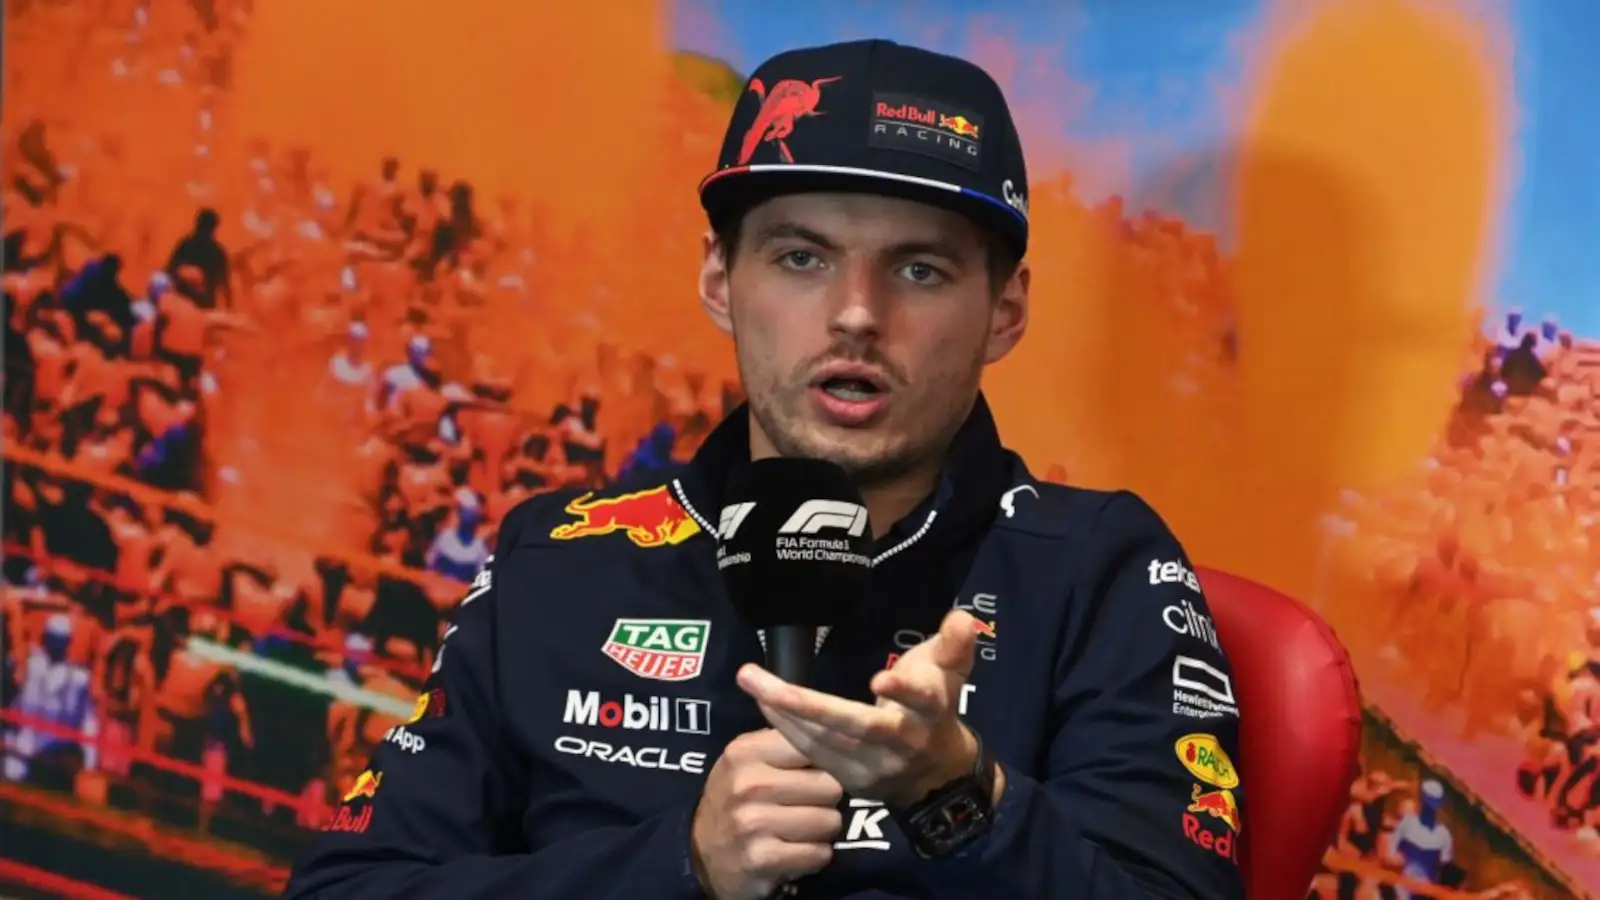 Max Verstappen gestures while speaking during a press conference. Miami May 2022